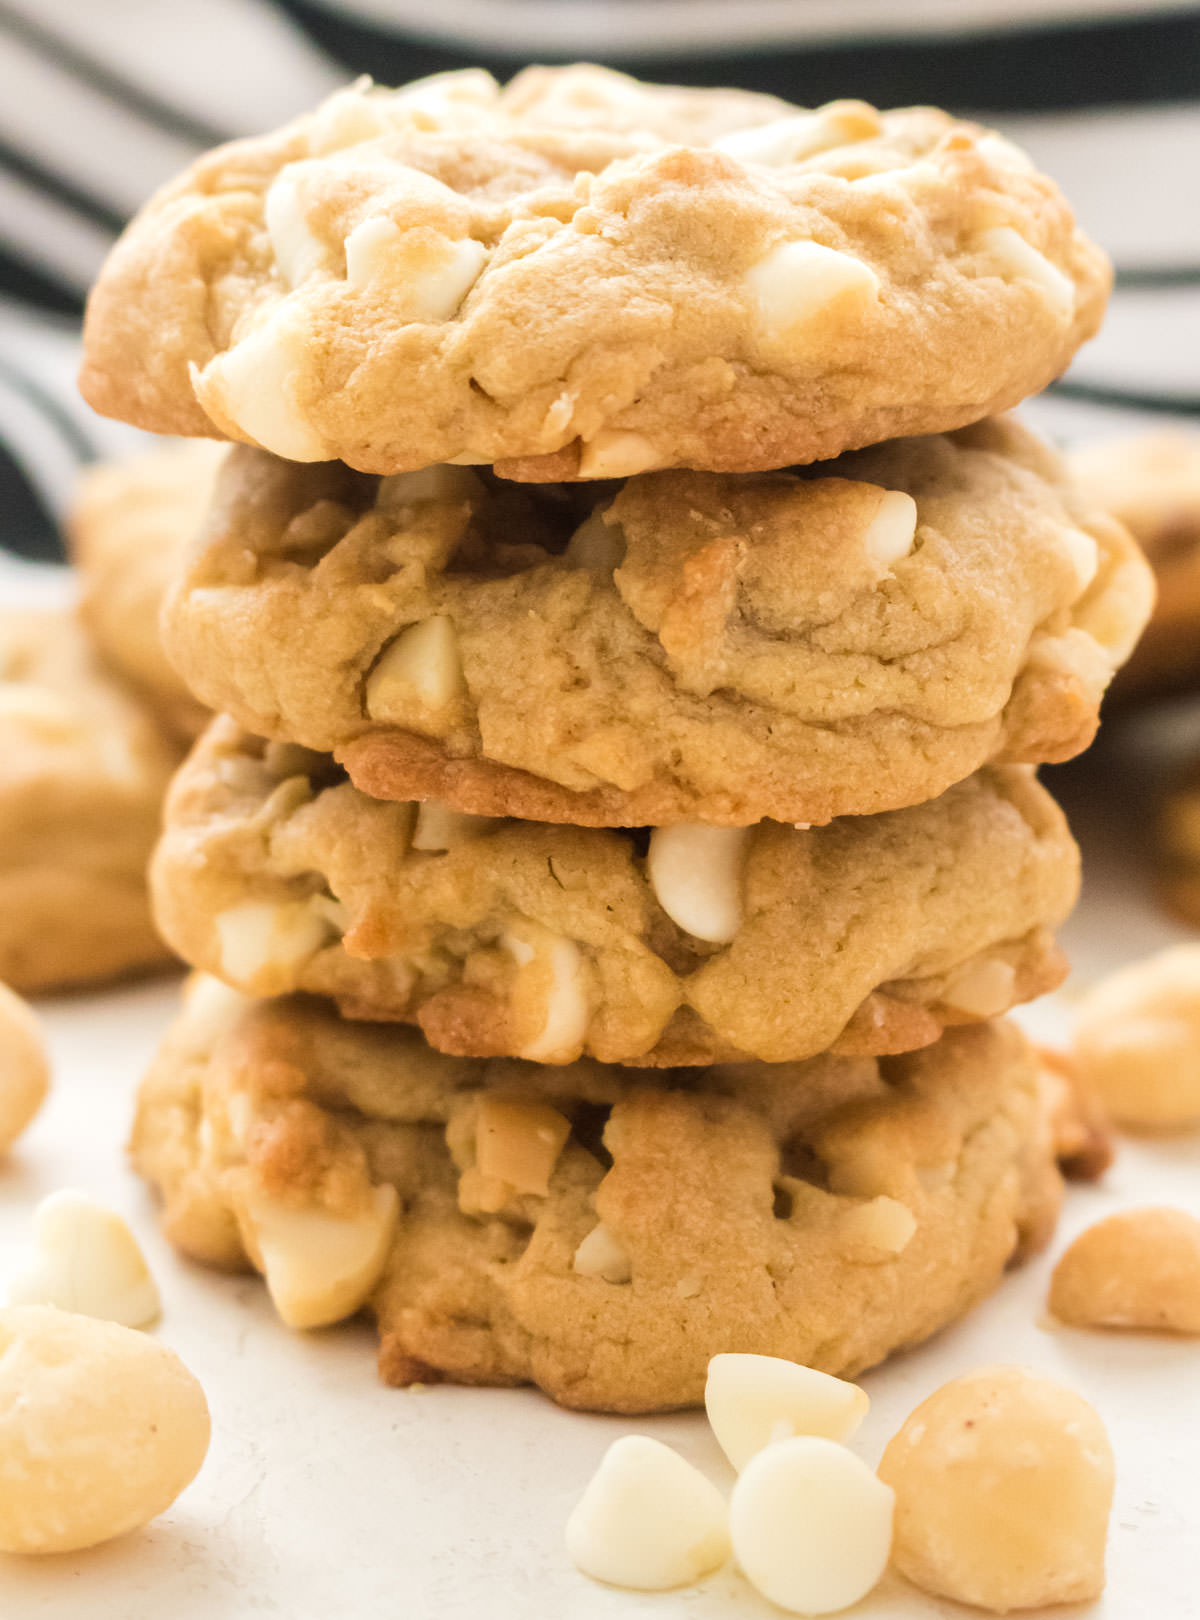 Closeup on a stack of White Chocolate Macadamia Nut Cookies sitting on a white table surrounded by White Chocolate Chips.